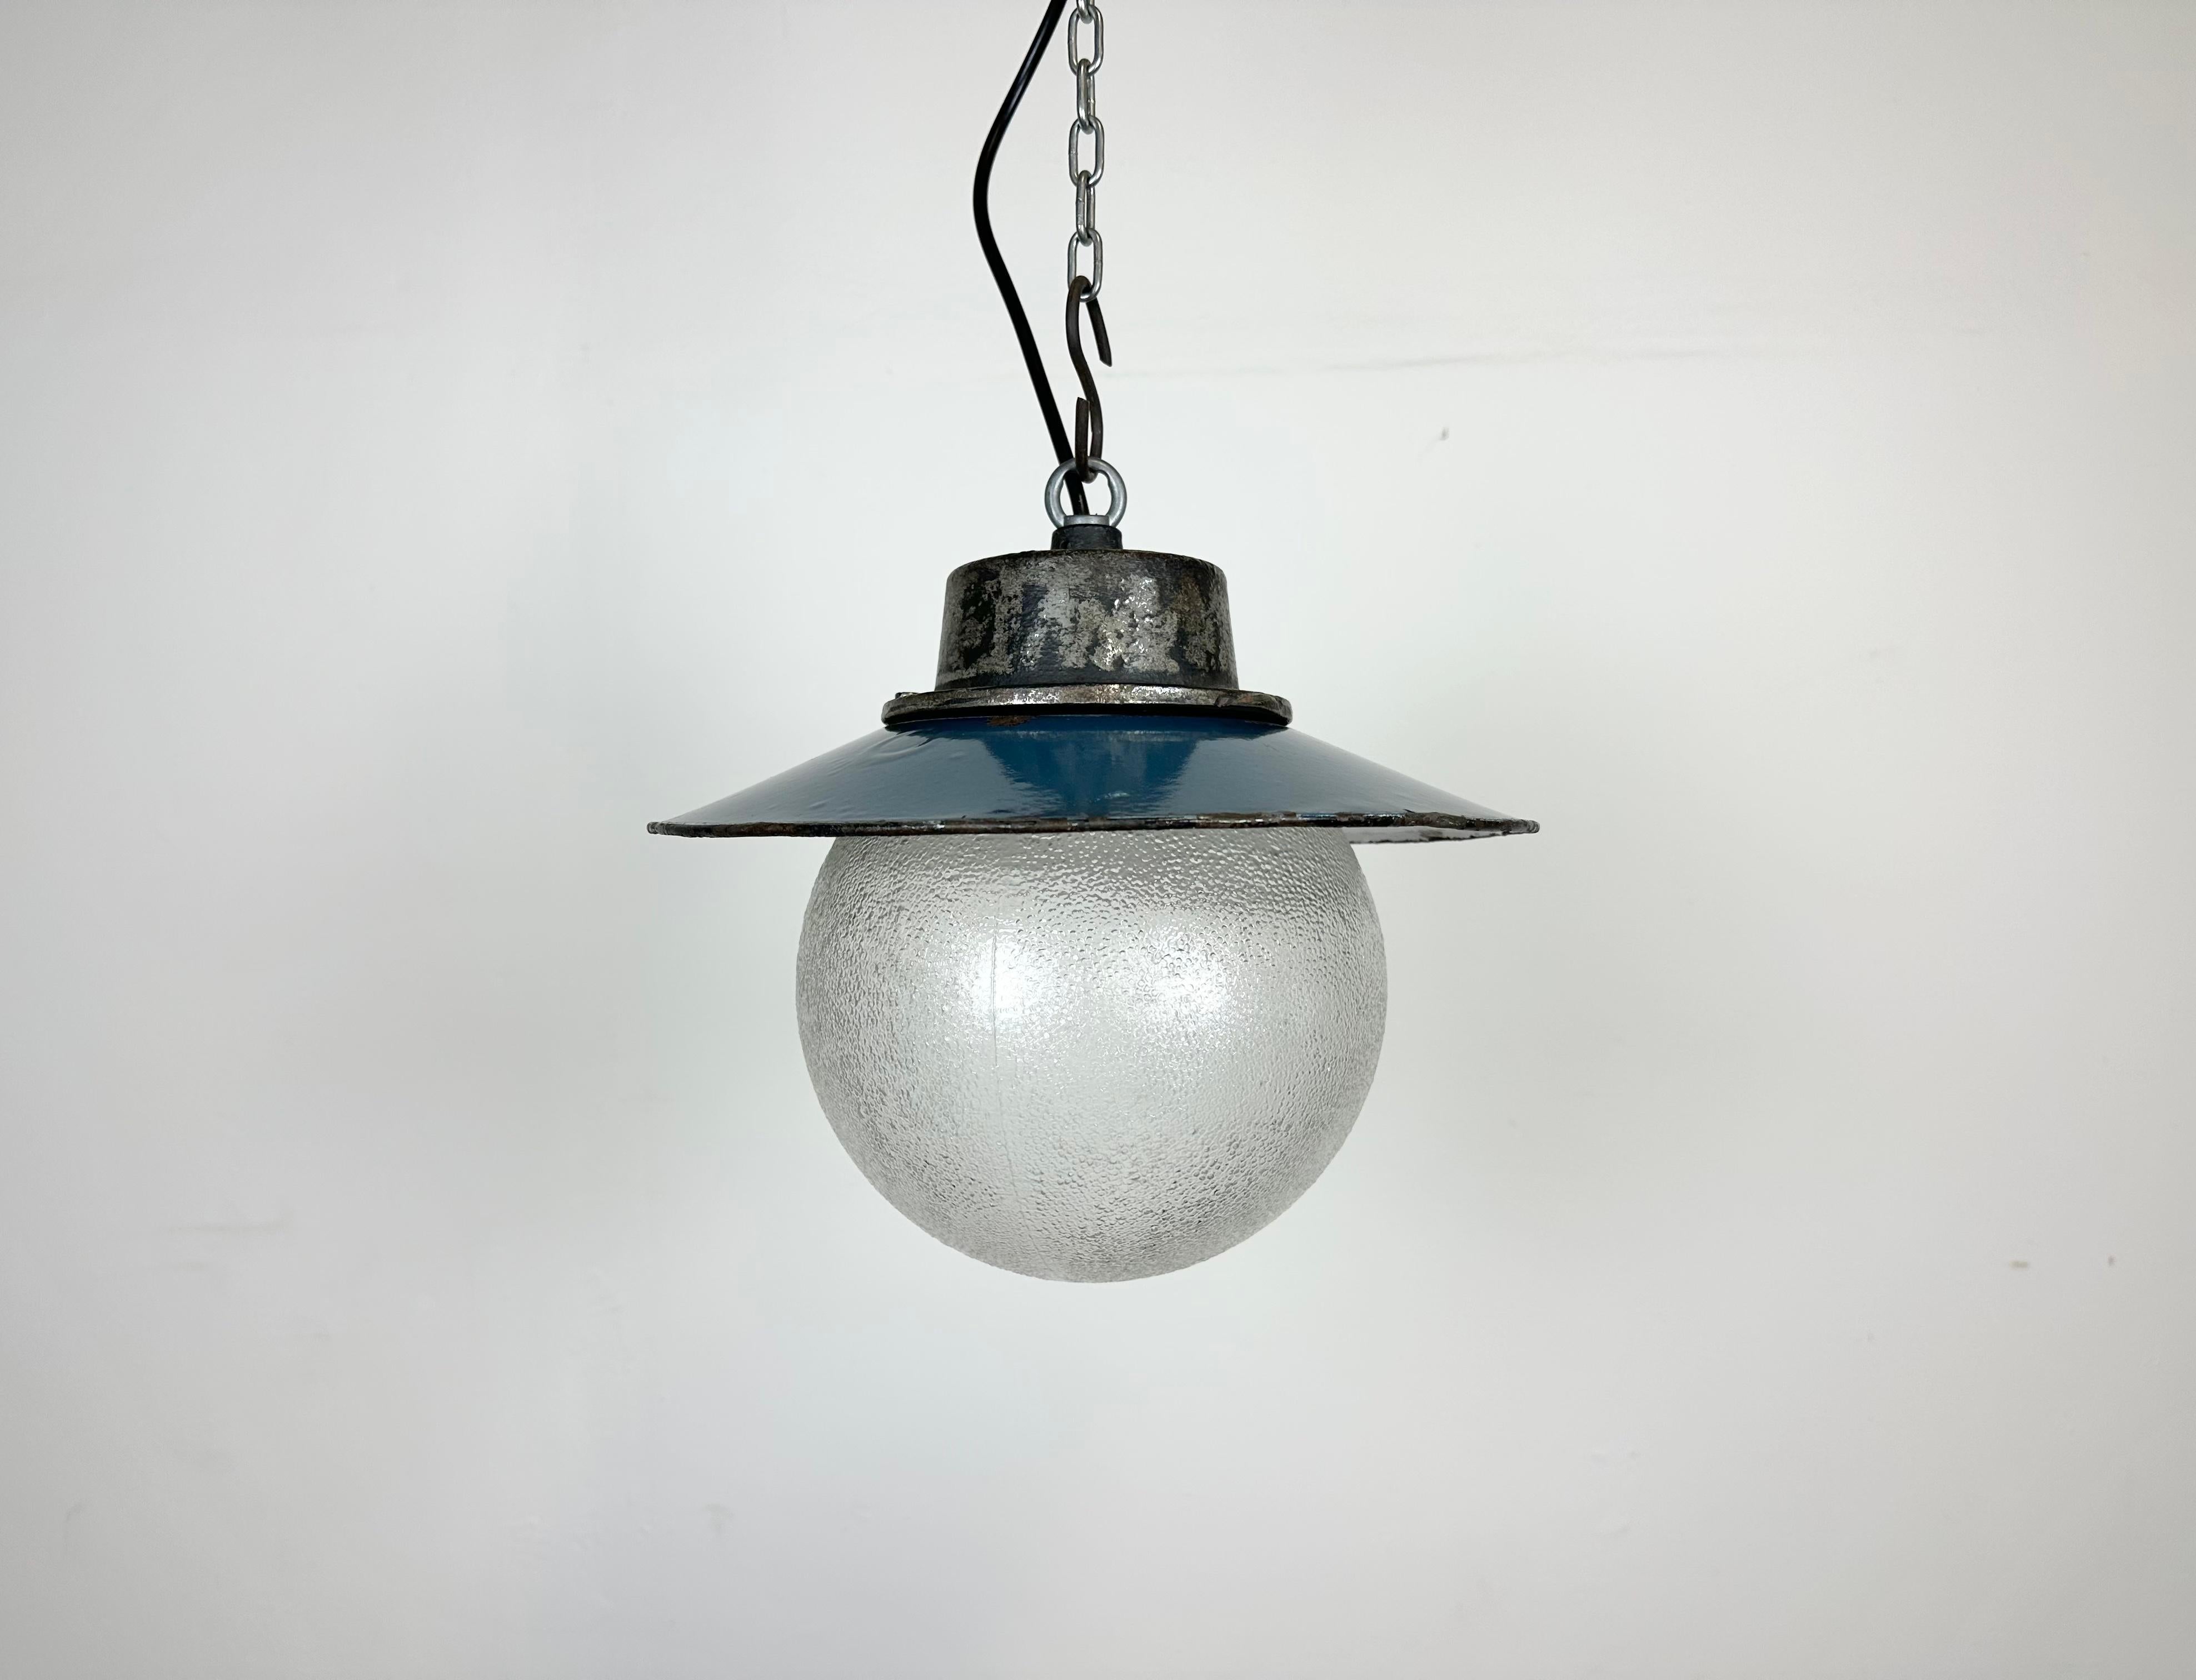 Industrial hanging lamp manufactured in Poland during the 1960s. It features a blue enamel shade with a white enamel interior, a cast iron top, and a frosted glass cover. The porcelain socket requires E 27/ E26 lightbulbs. New wire. The weight of